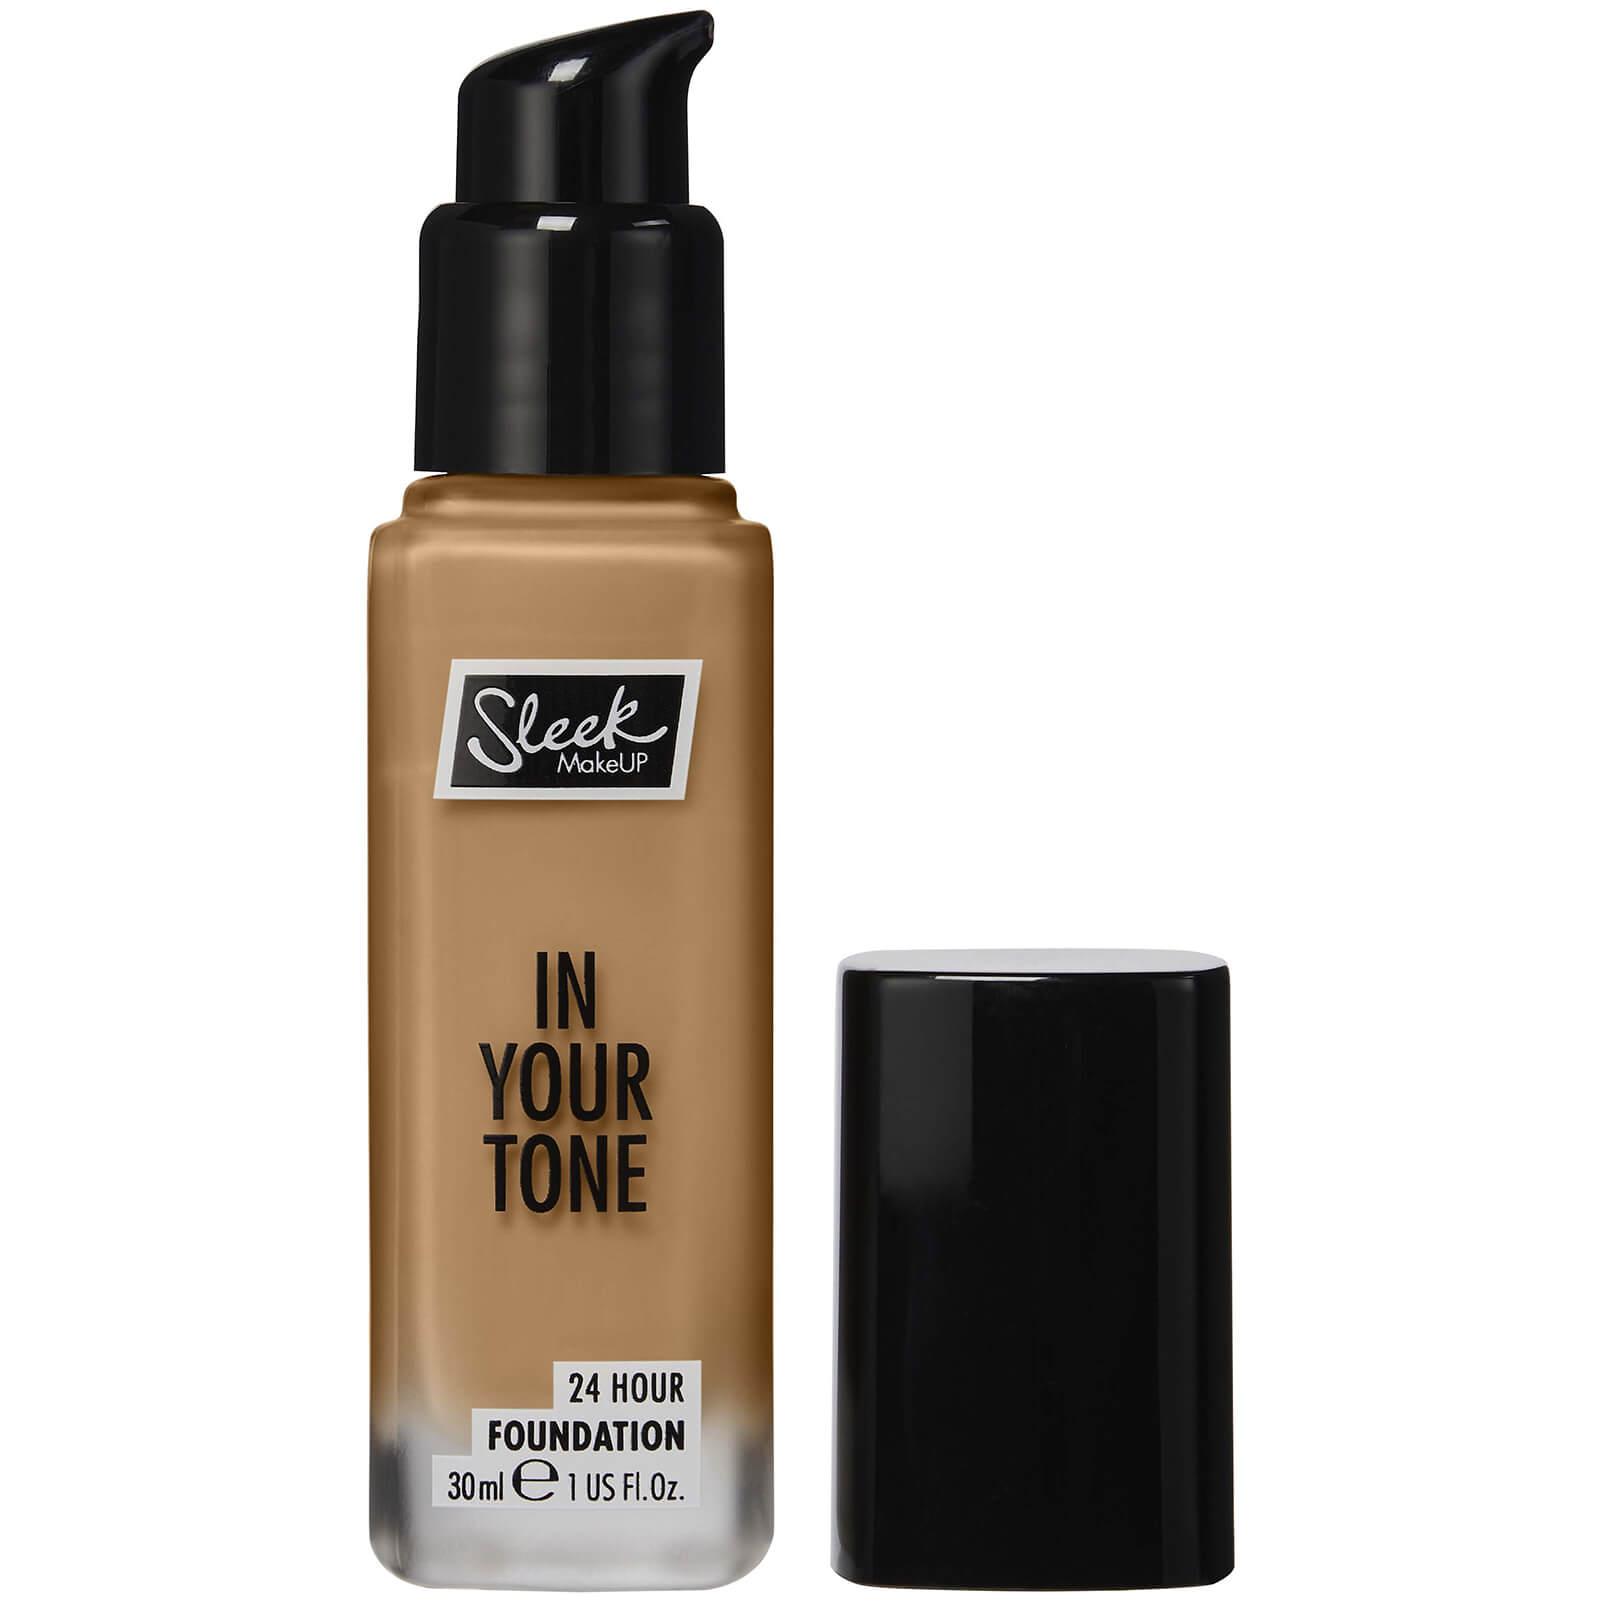 Sleek MakeUP in Your Tone 24 Hour Foundation 30ml (Various Shades) - 8W